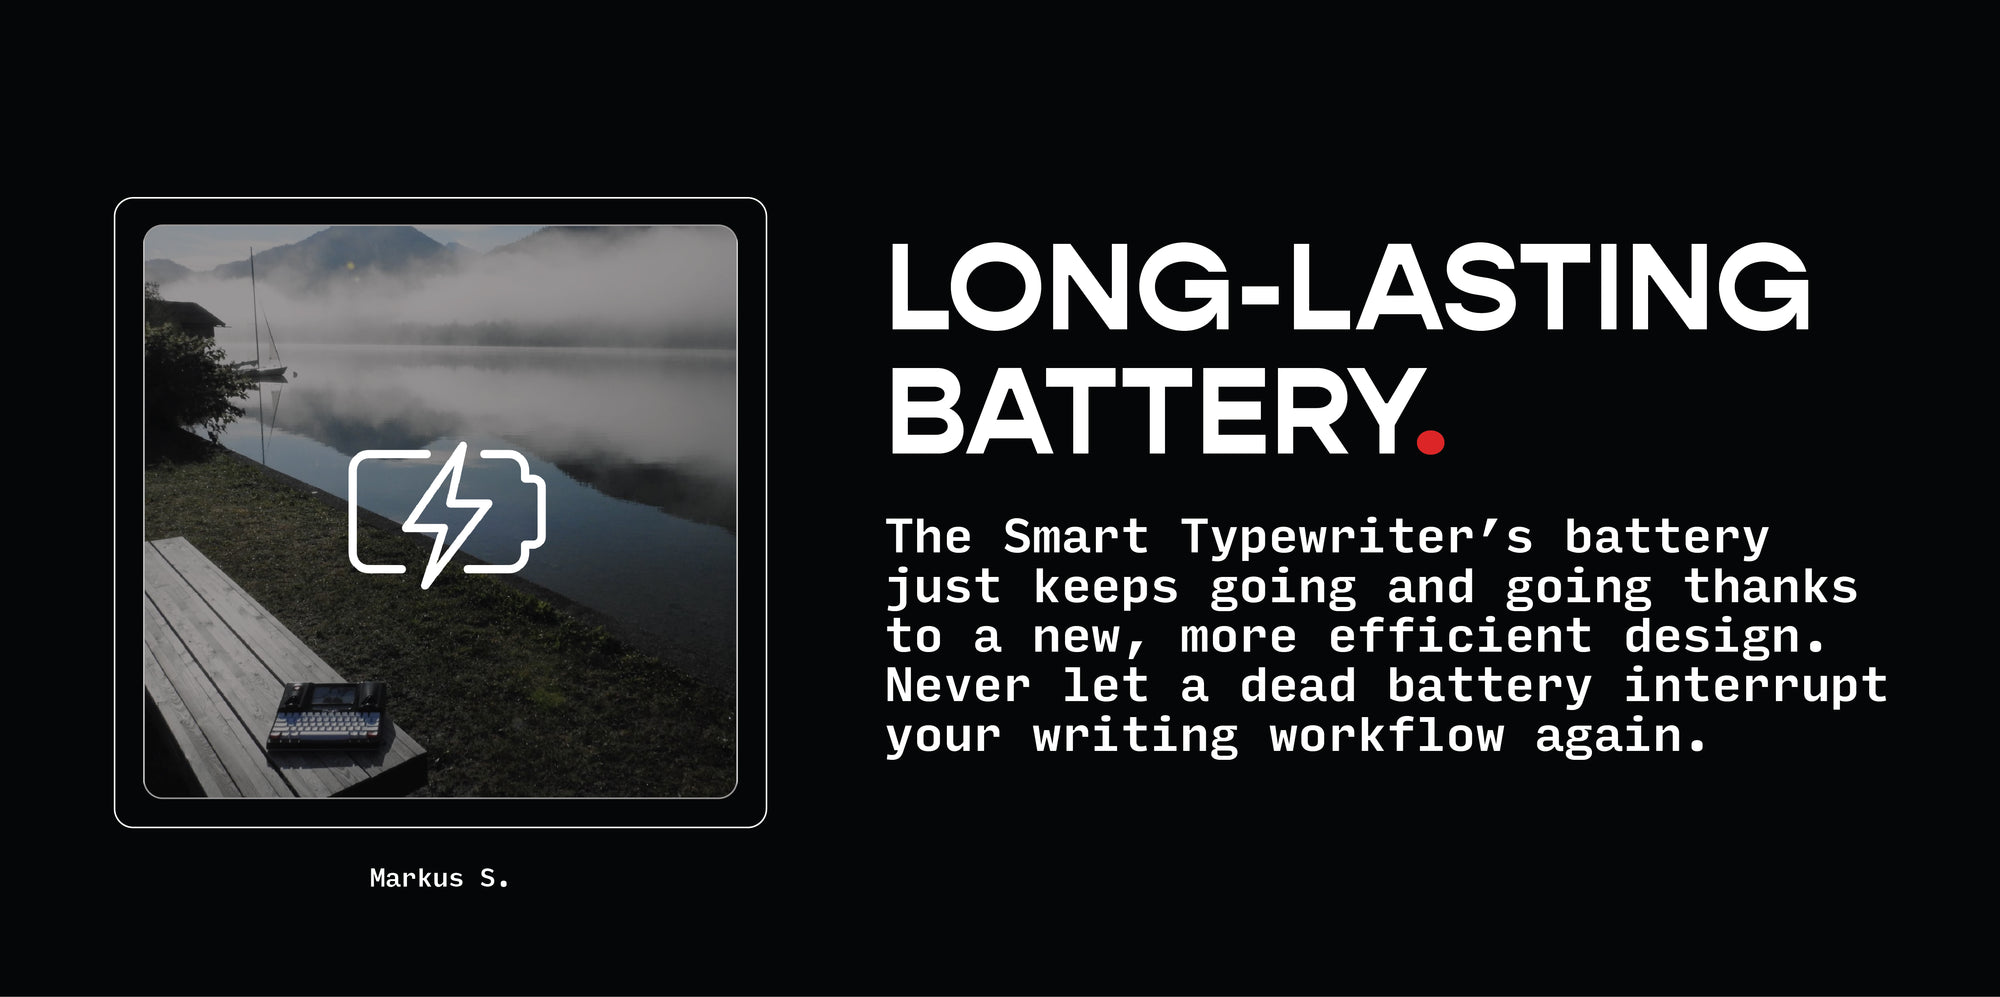 LONG-LASTING BATTERY.  The Smart Typewriter’s battery just keeps going and going thanks to a new, more efficient design. Never let a dead battery interrupt your writing workflow again.